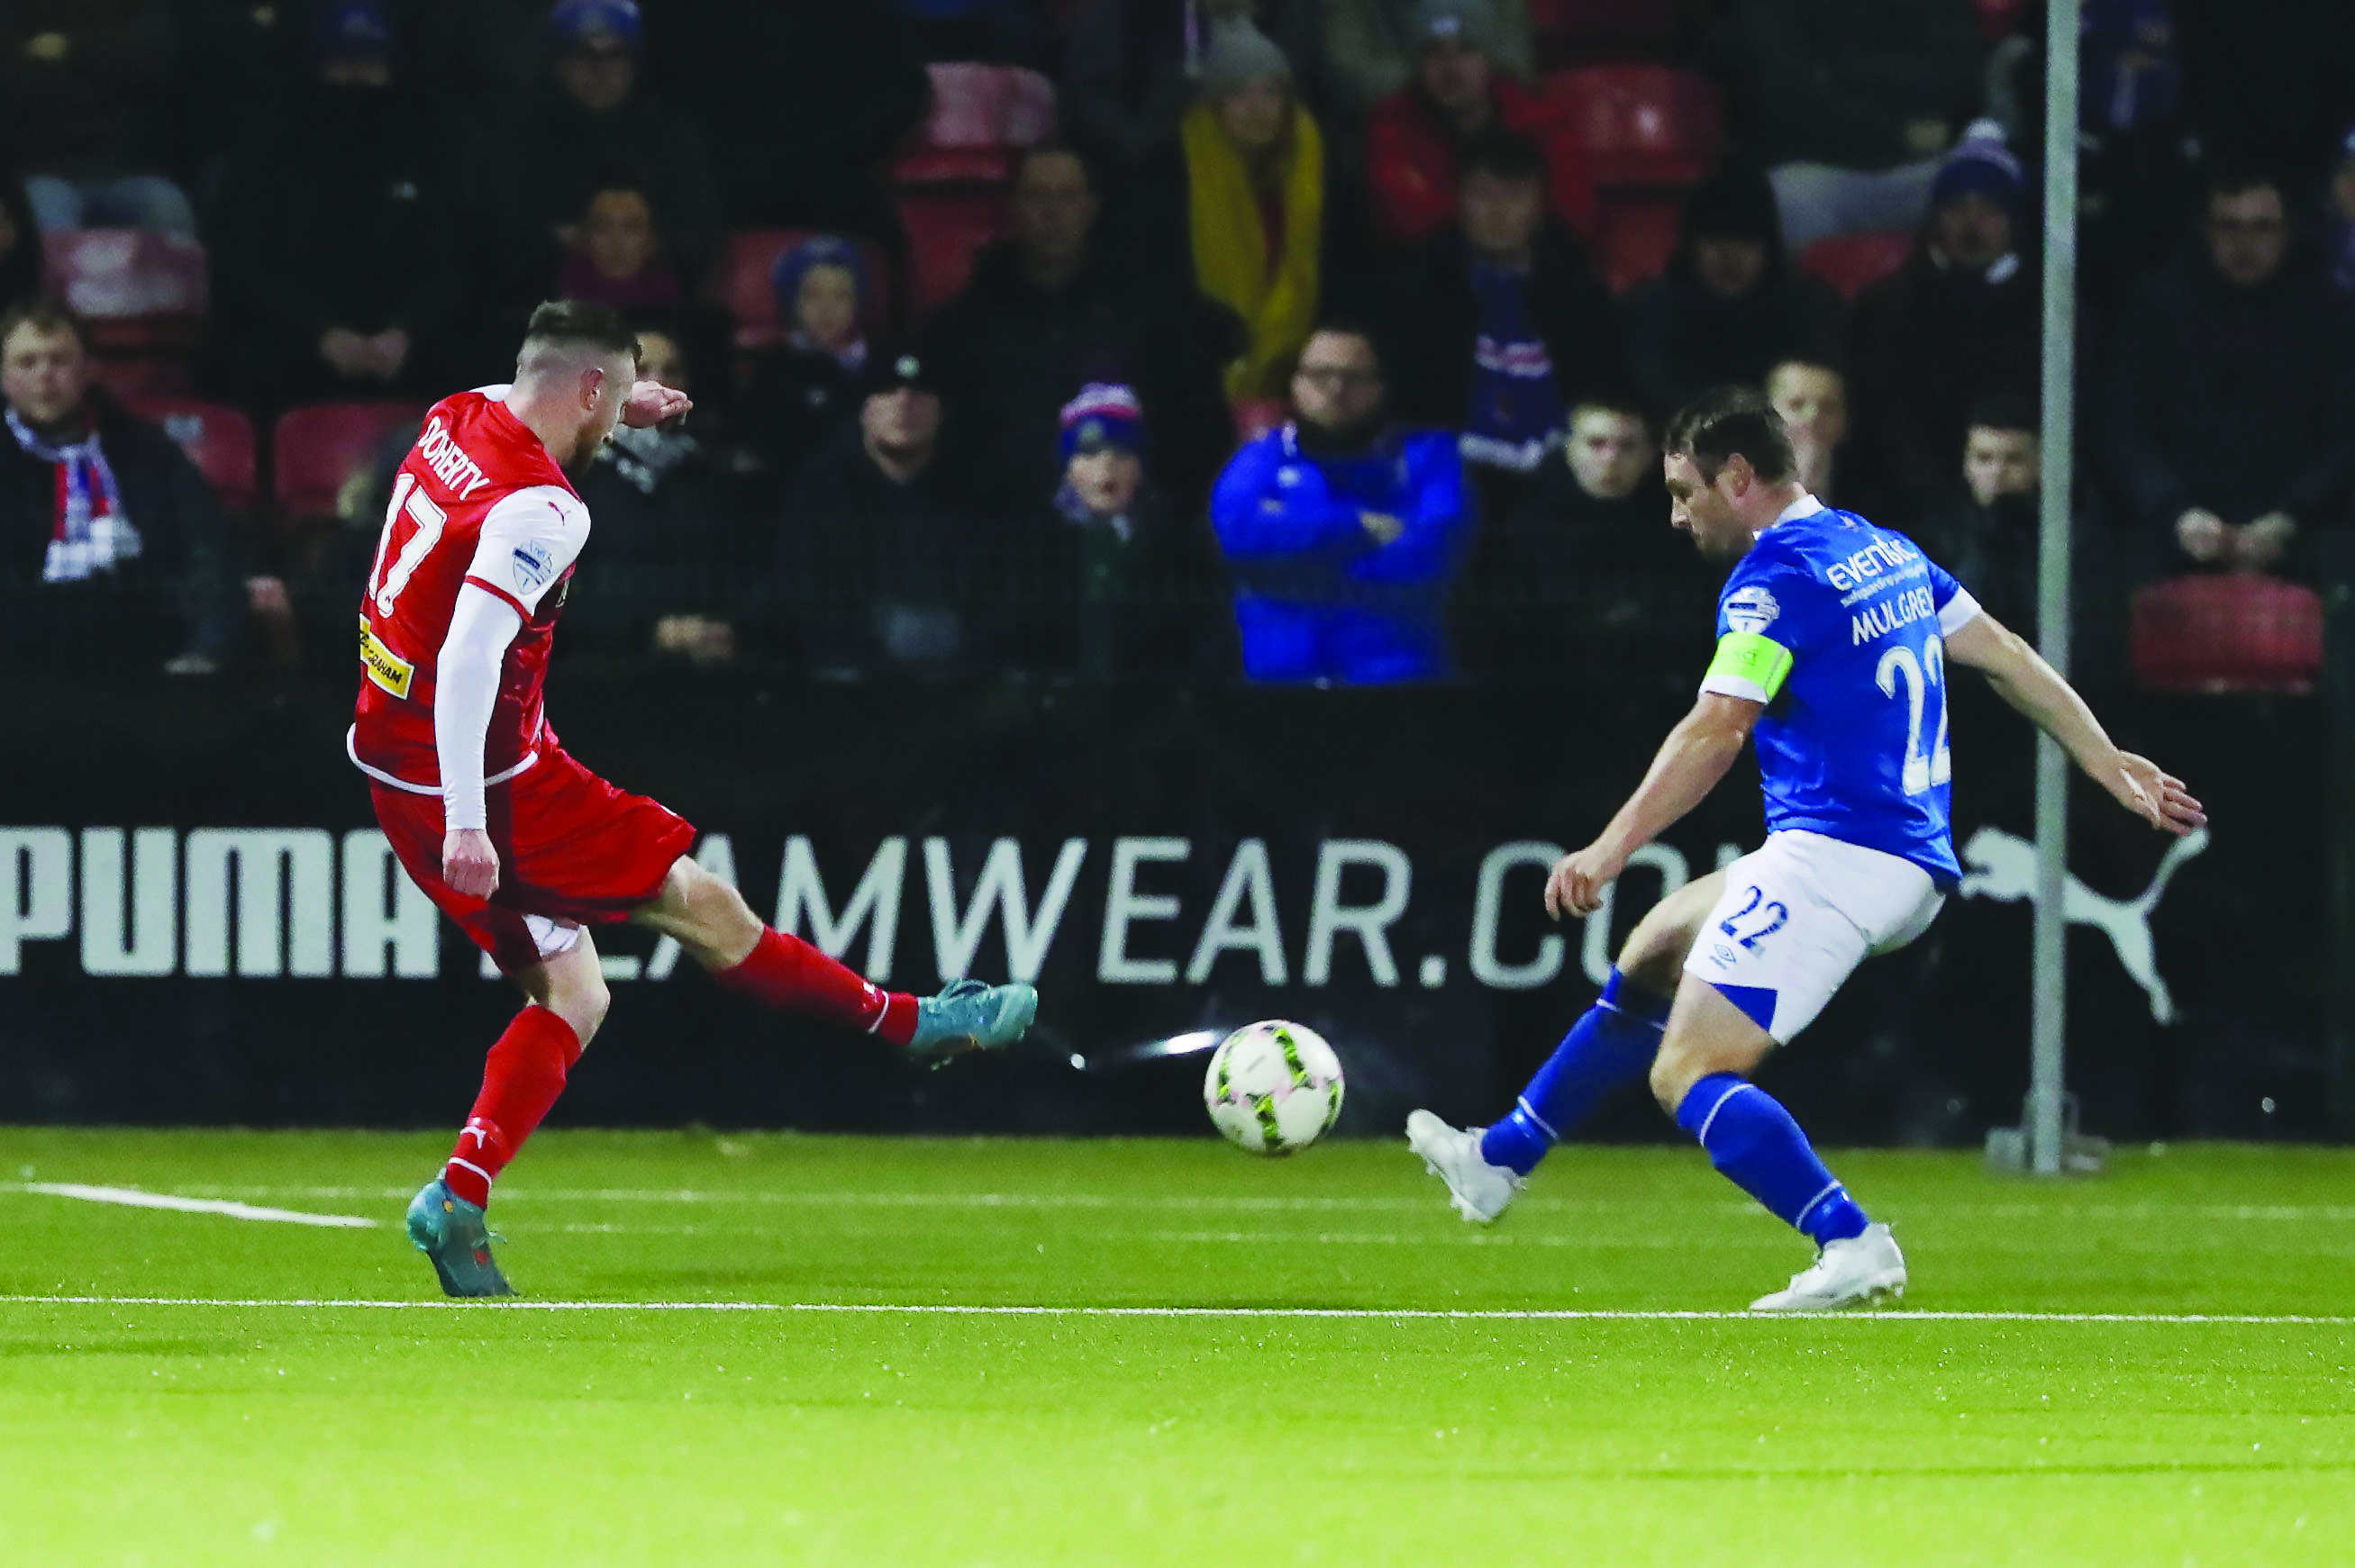 Cliftonville manager Paddy McLaughlin has heaped praise on Ronan Doherty who scored the only goal against Linfield on Tuesday